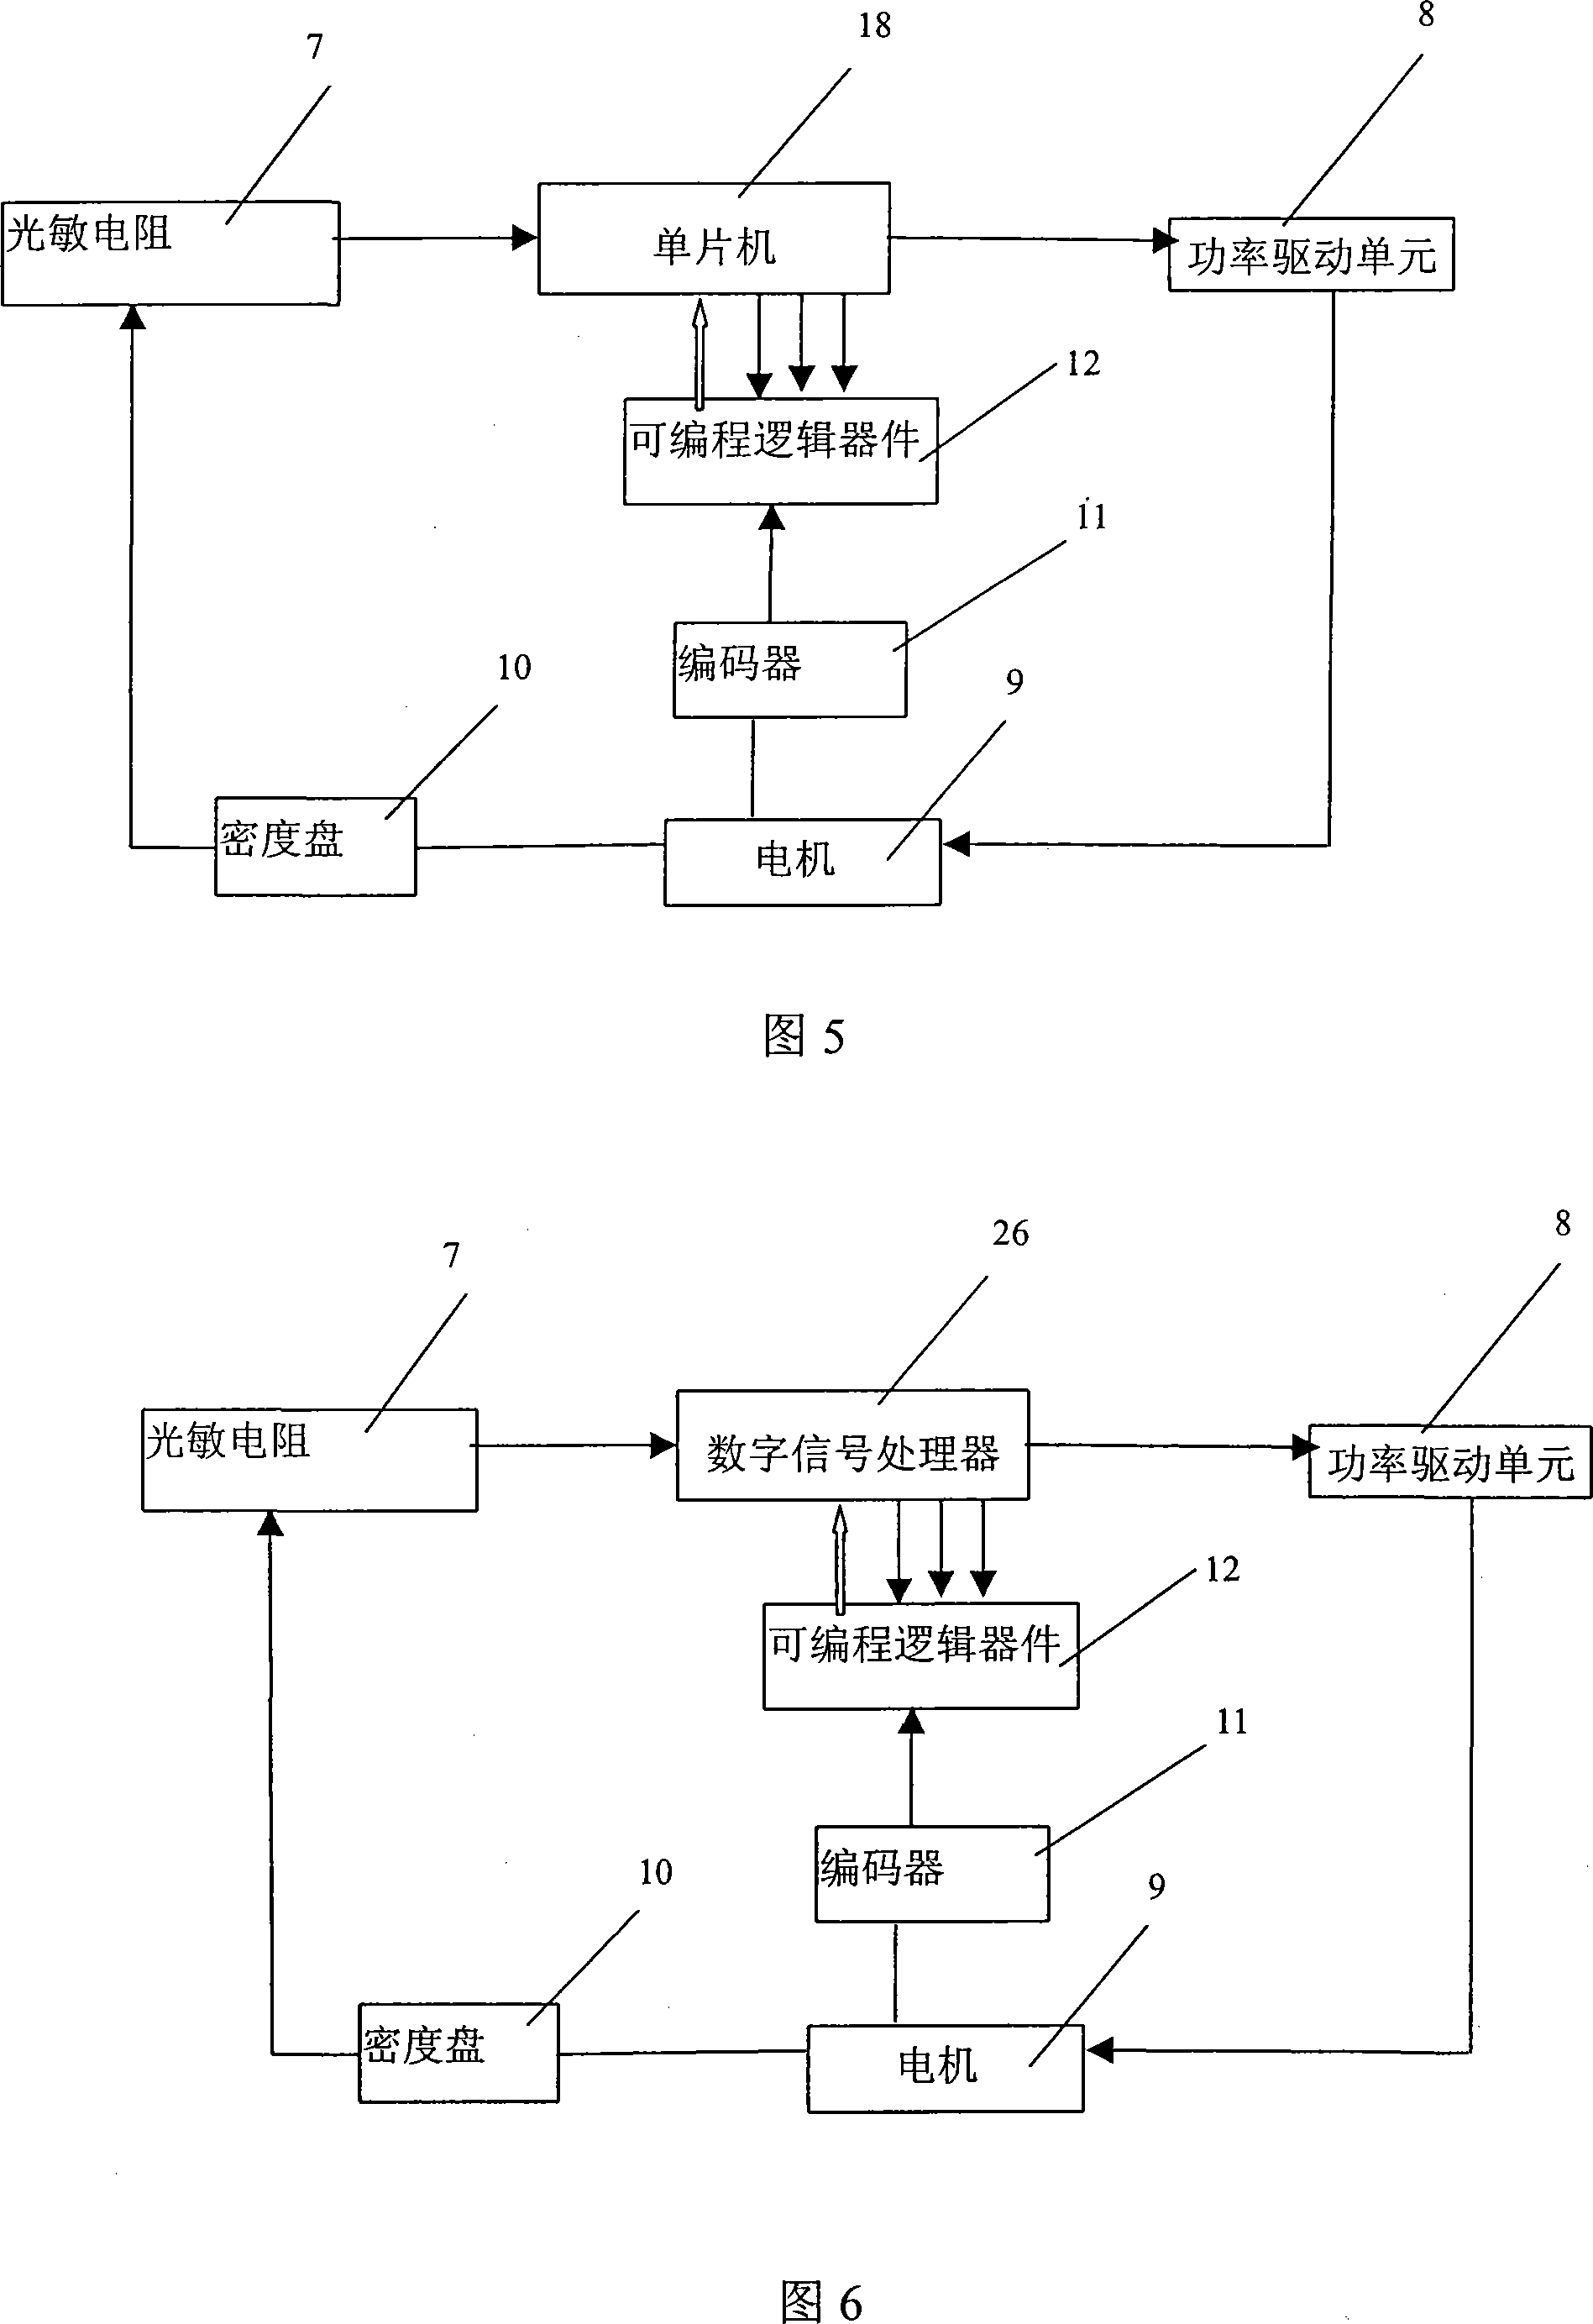 Density disc drive device of automatic light modulation system